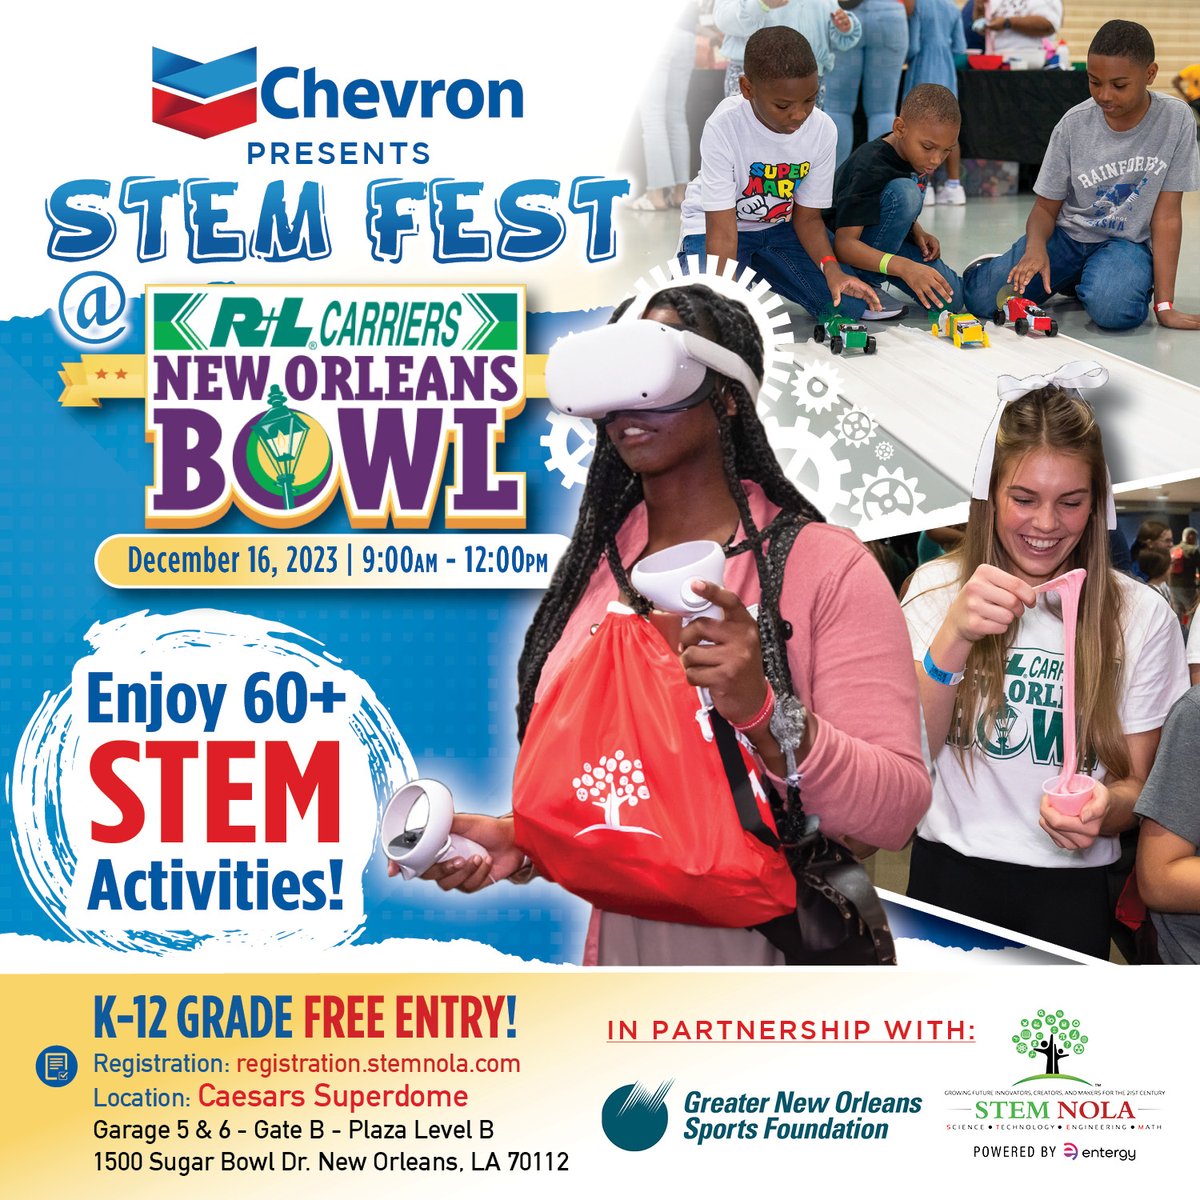 Join us for STEM FEST at the New Orleans Bowl! @STEMNOLA is taking over @CaesarsDome on Saturday, 12/16, from 9-12 for STEM FEST, presented by @Chevron, at the @RLCarriers @NewOrleansBowl. K-12 students will get hands-on at 60+ STEM stations! registration.stemnola.com #RLBowl